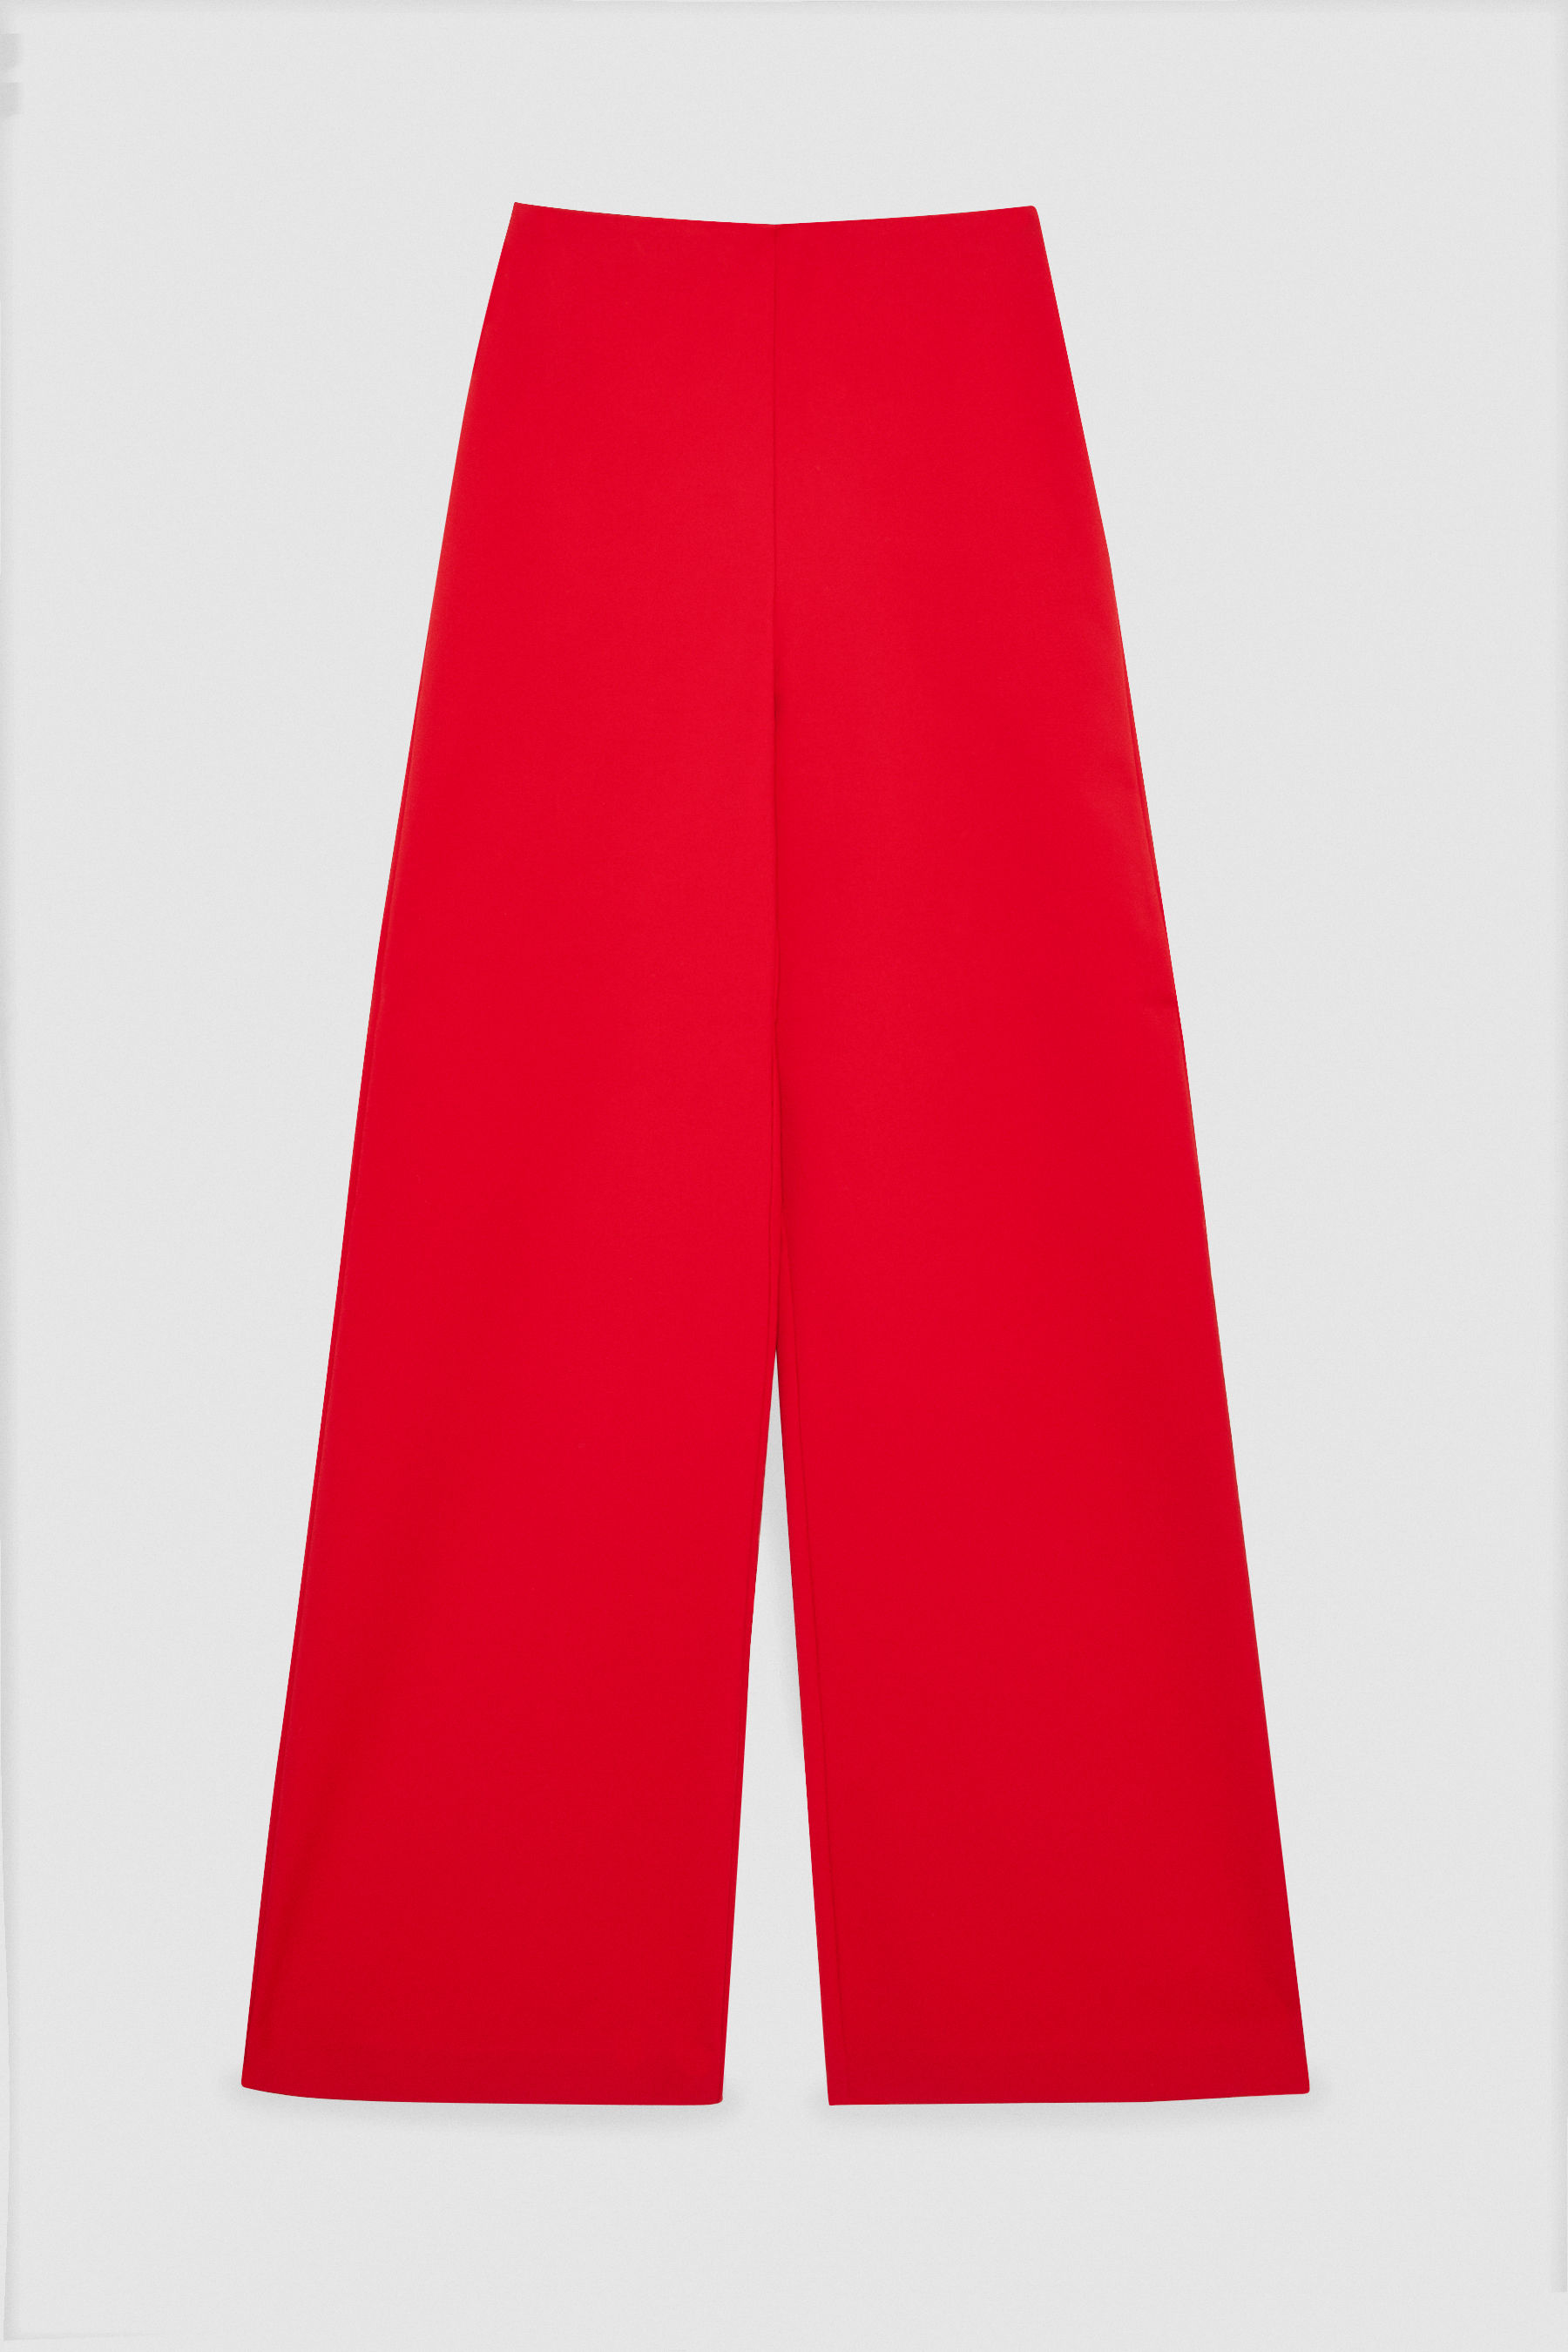 Womens Clothing Trousers Patrizia Pepe Synthetic Pants in Coral Slacks and Chinos Wide-leg and palazzo trousers Red 